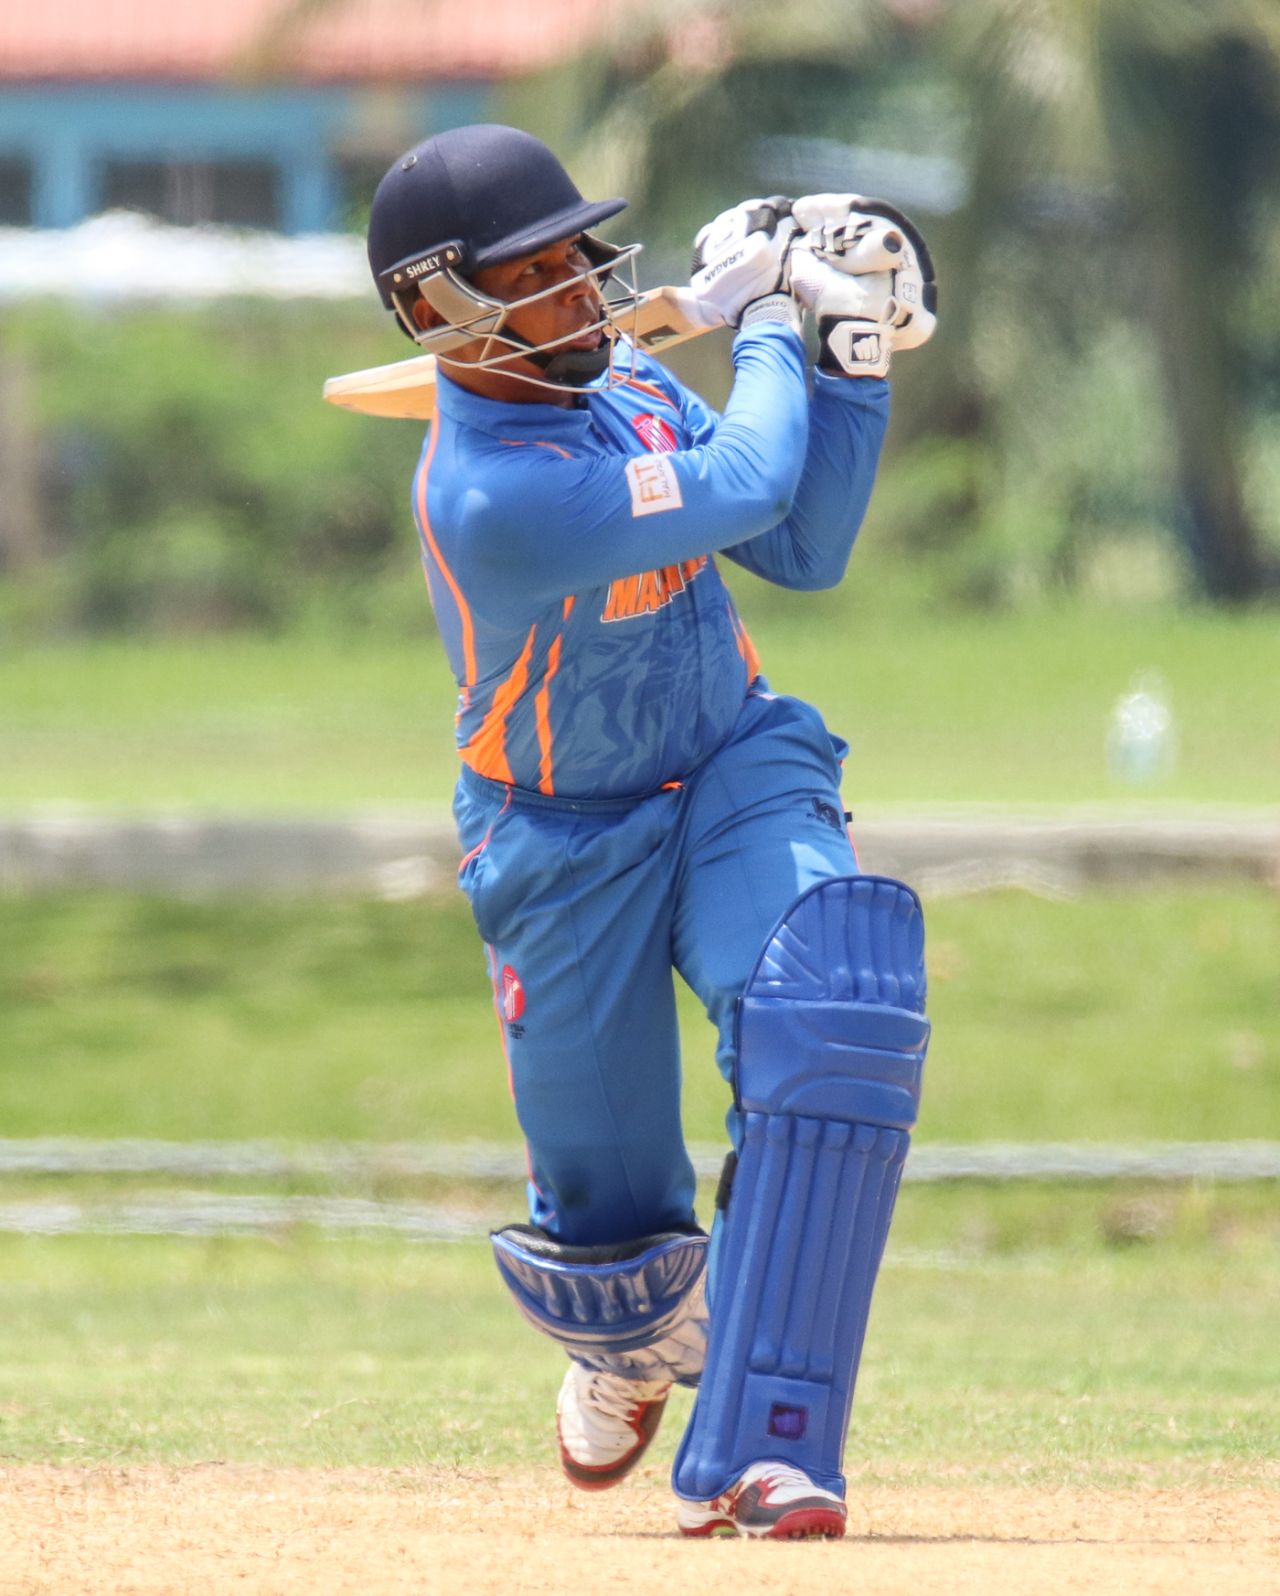 Ahmed Faiz looks on after connecting with a clean strike over midwicket, Malaysia v Denmark, ICC World Cricket League Division Four, Bangi, May 2, 2018